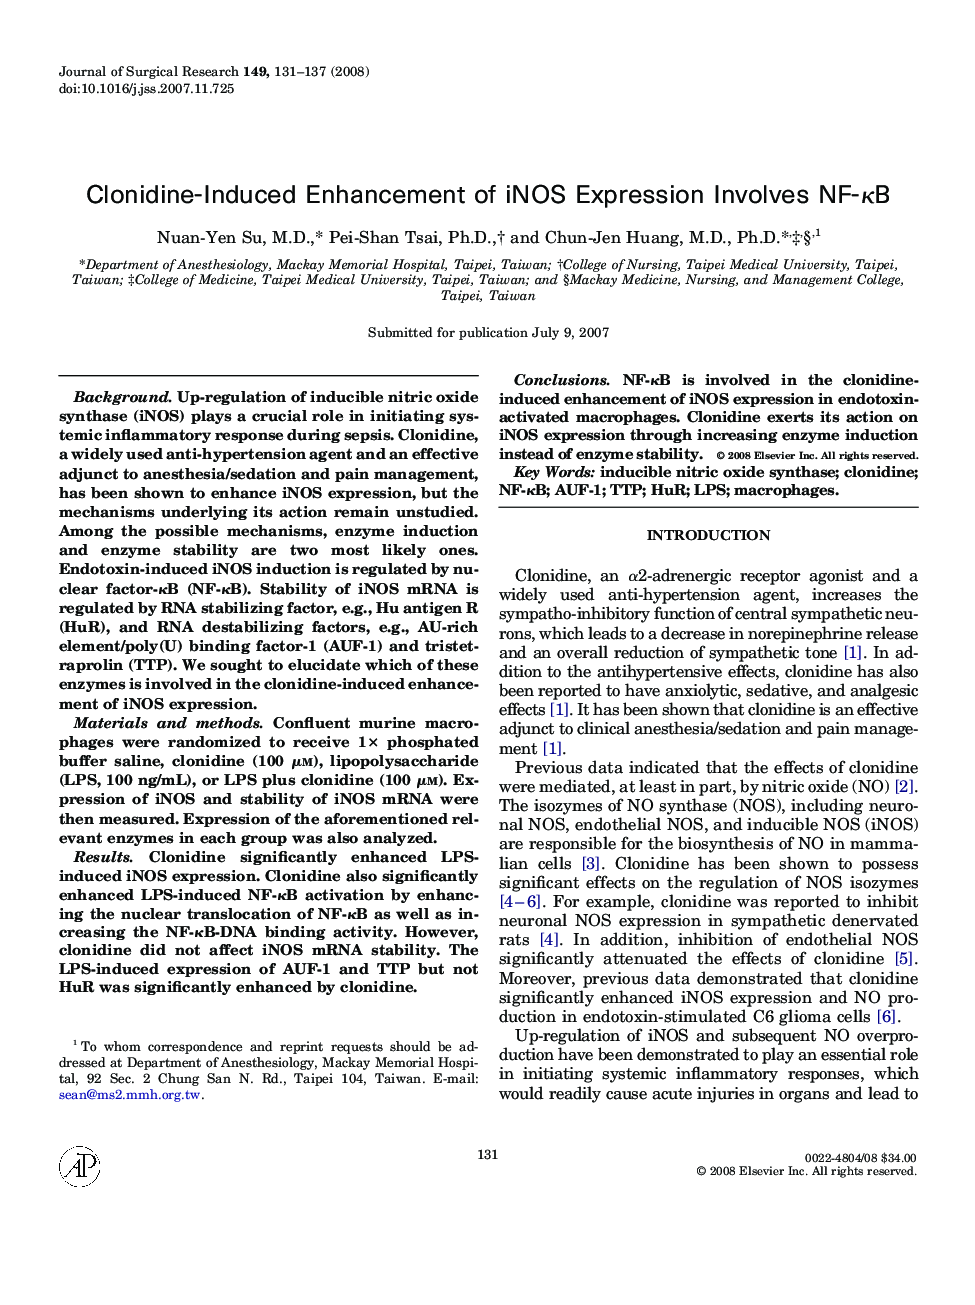 Clonidine-Induced Enhancement of iNOS Expression Involves NF-κB